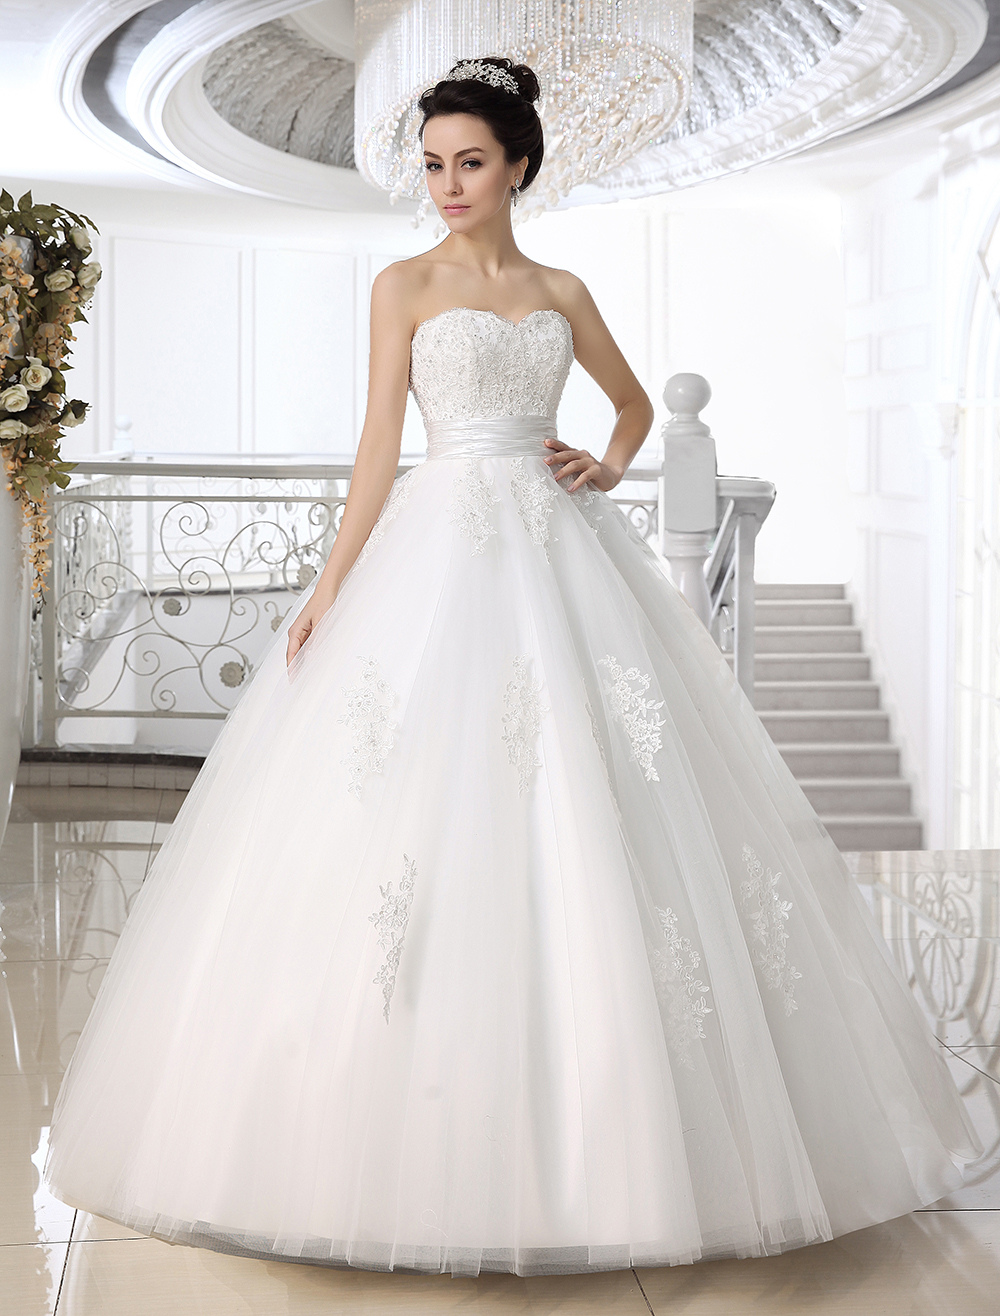 White Ball Gown Strapless Sweetheart Neck Lace Floor Length Wedding 6567